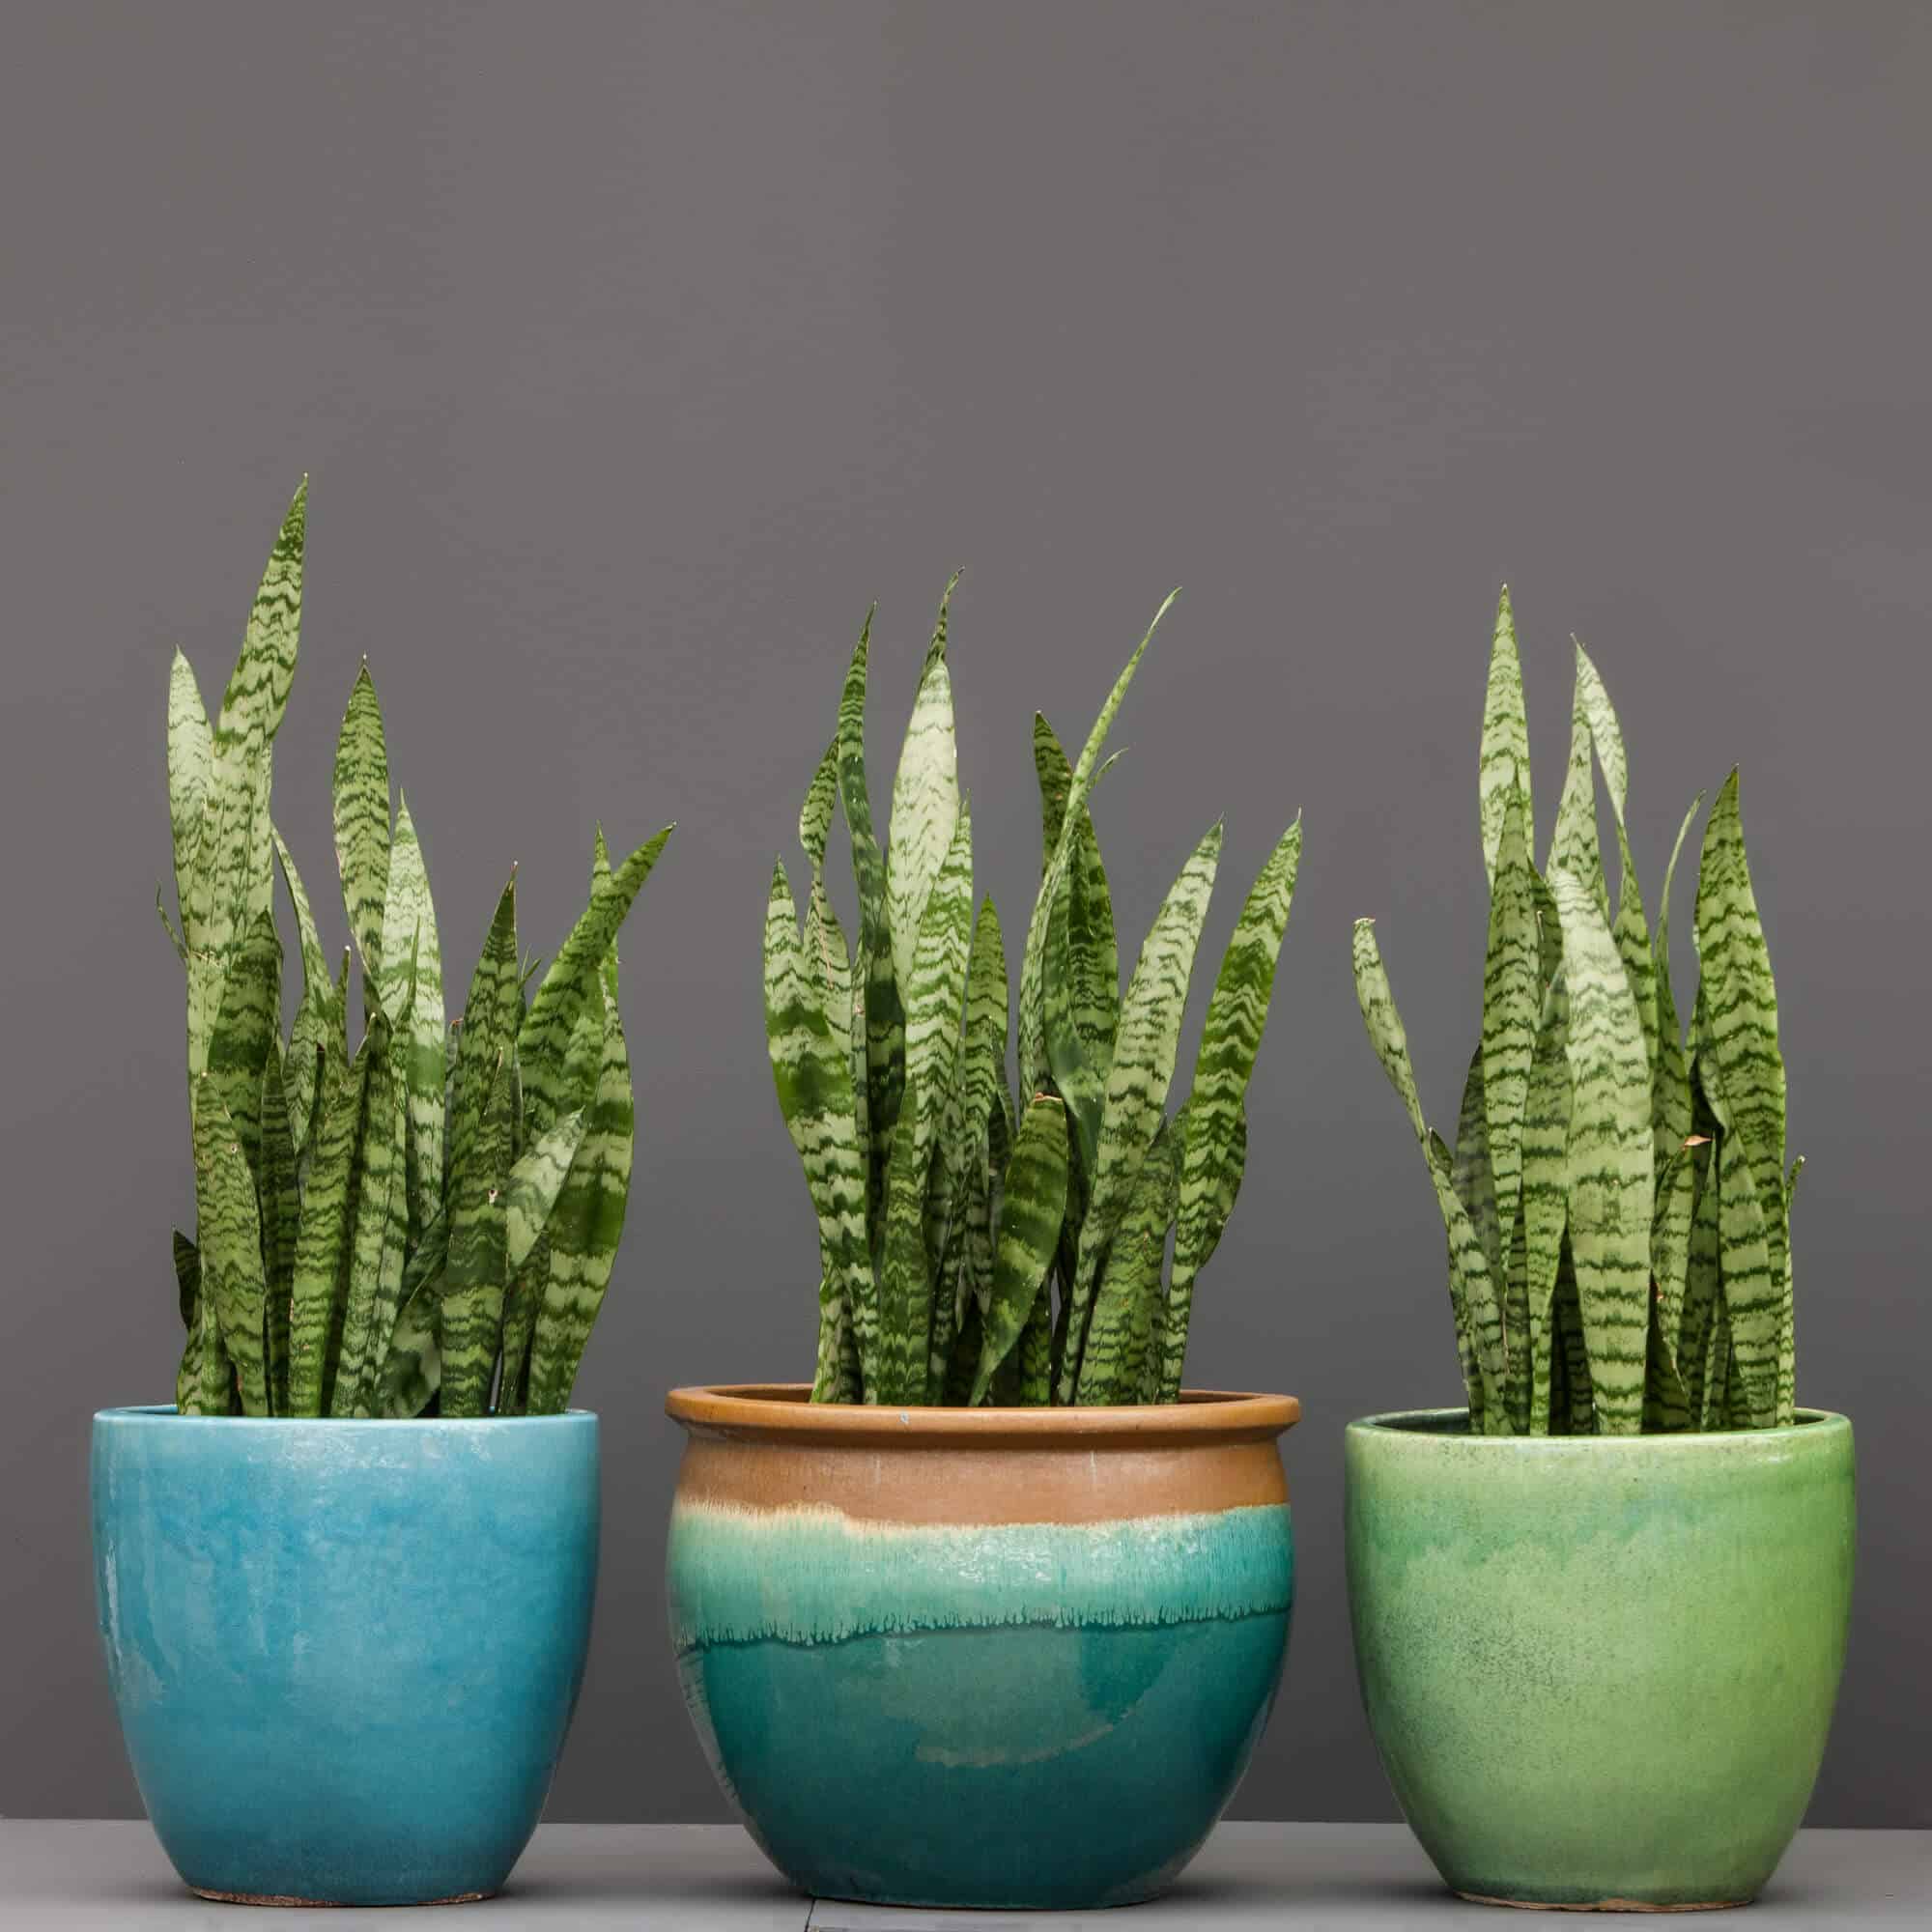 Three different-coloured green plant pots each containing a snake plant.